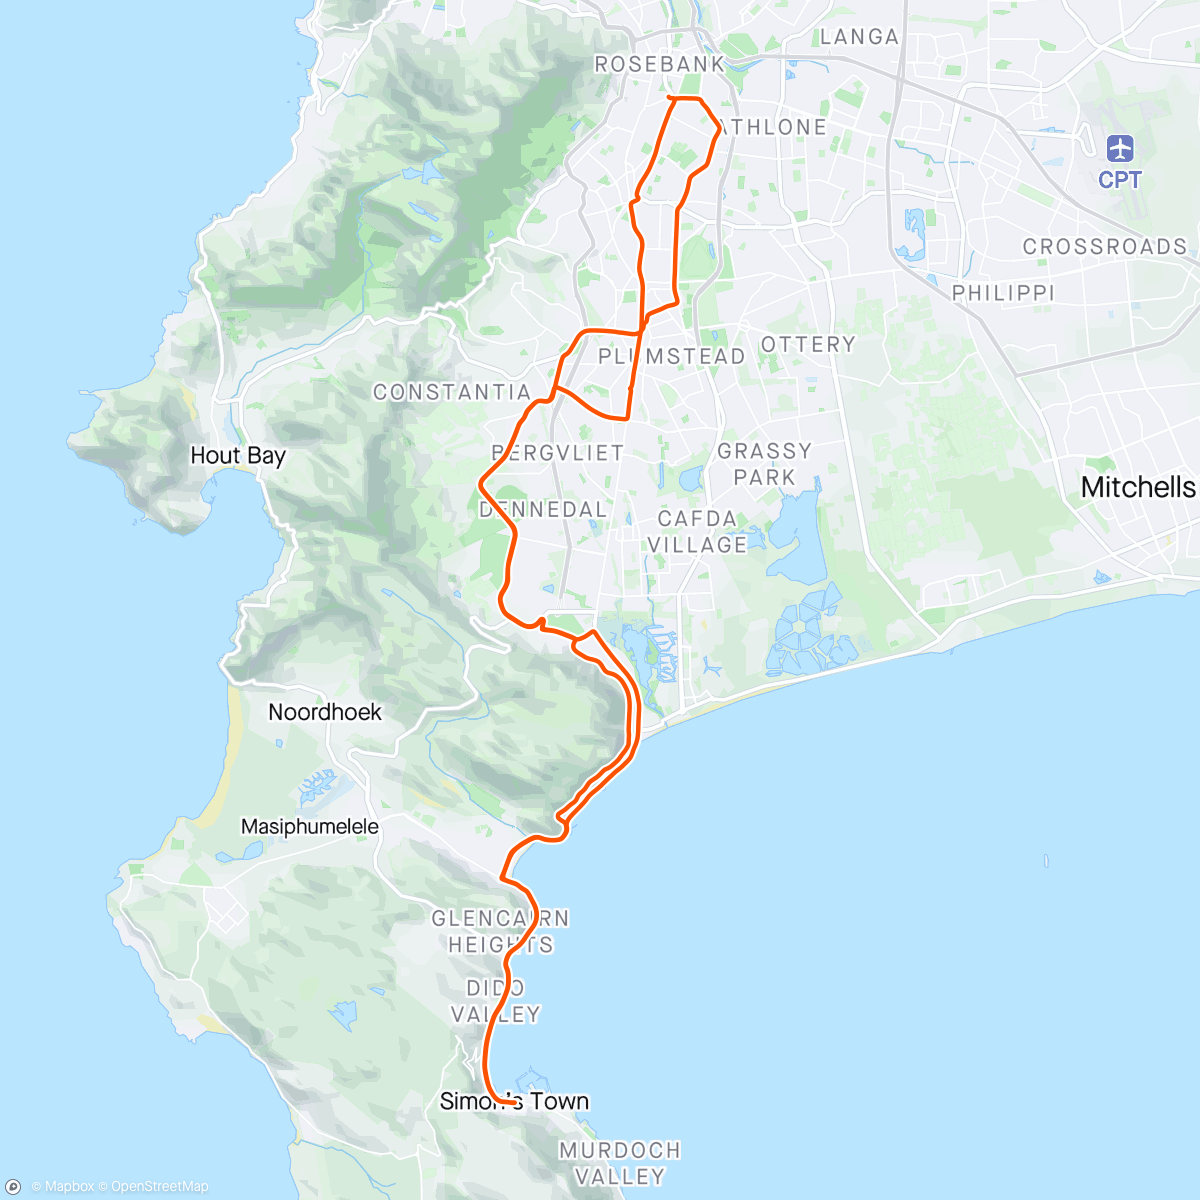 Mapa de la actividad (Morning Ride - last of the last with the CTG crew 🤗, going to miss this for the next few weeks but there is a bigger journey ahead)